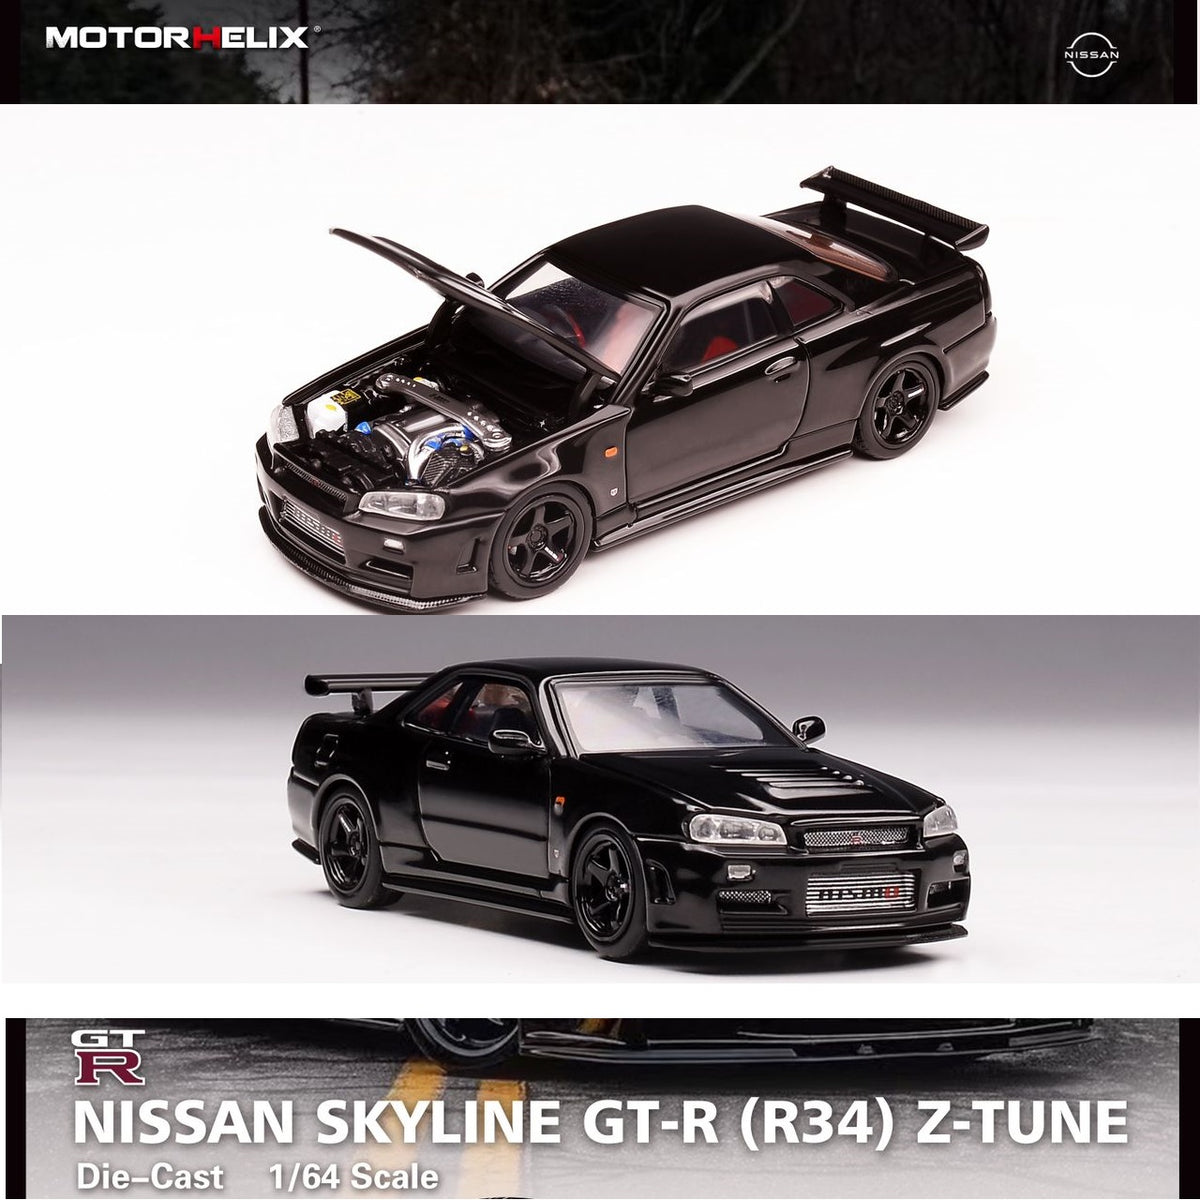 PREORDER MOTORHELIX 1/64 NISSAN SKYLINE GT-R (R34) Z-TUNE - Pearl Black  (Approx. Release Date: MAY 2024 and subject to the manufacturer's final 